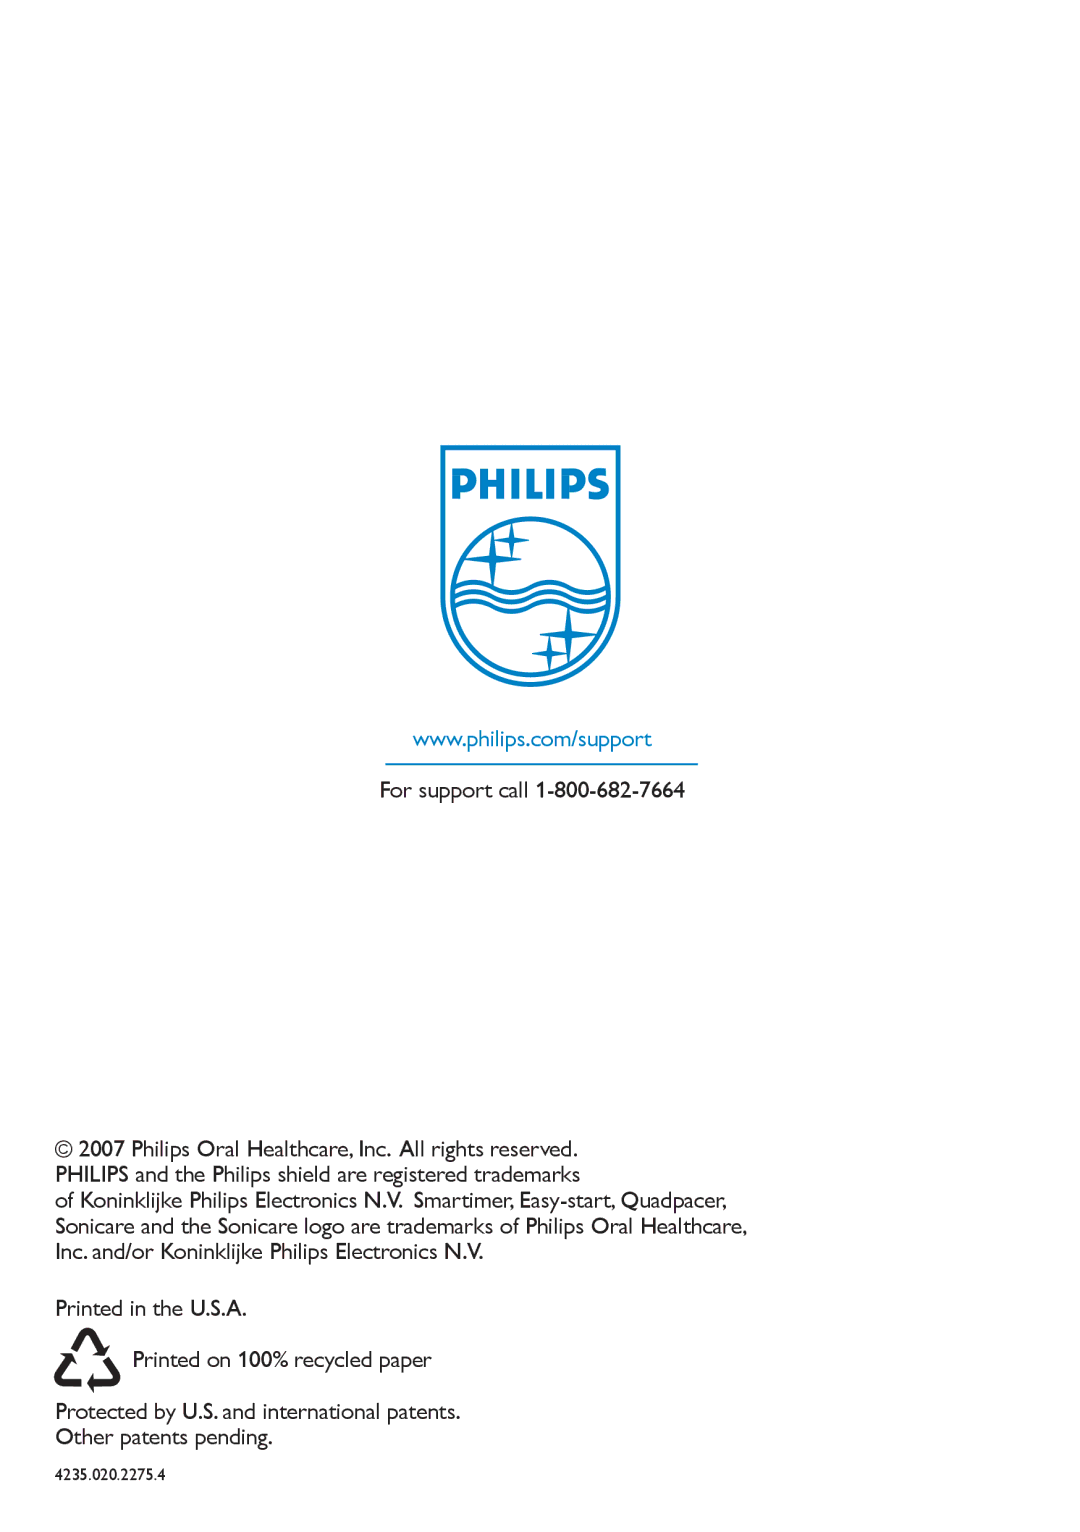 Philips FlexCare 900 manual For support call 